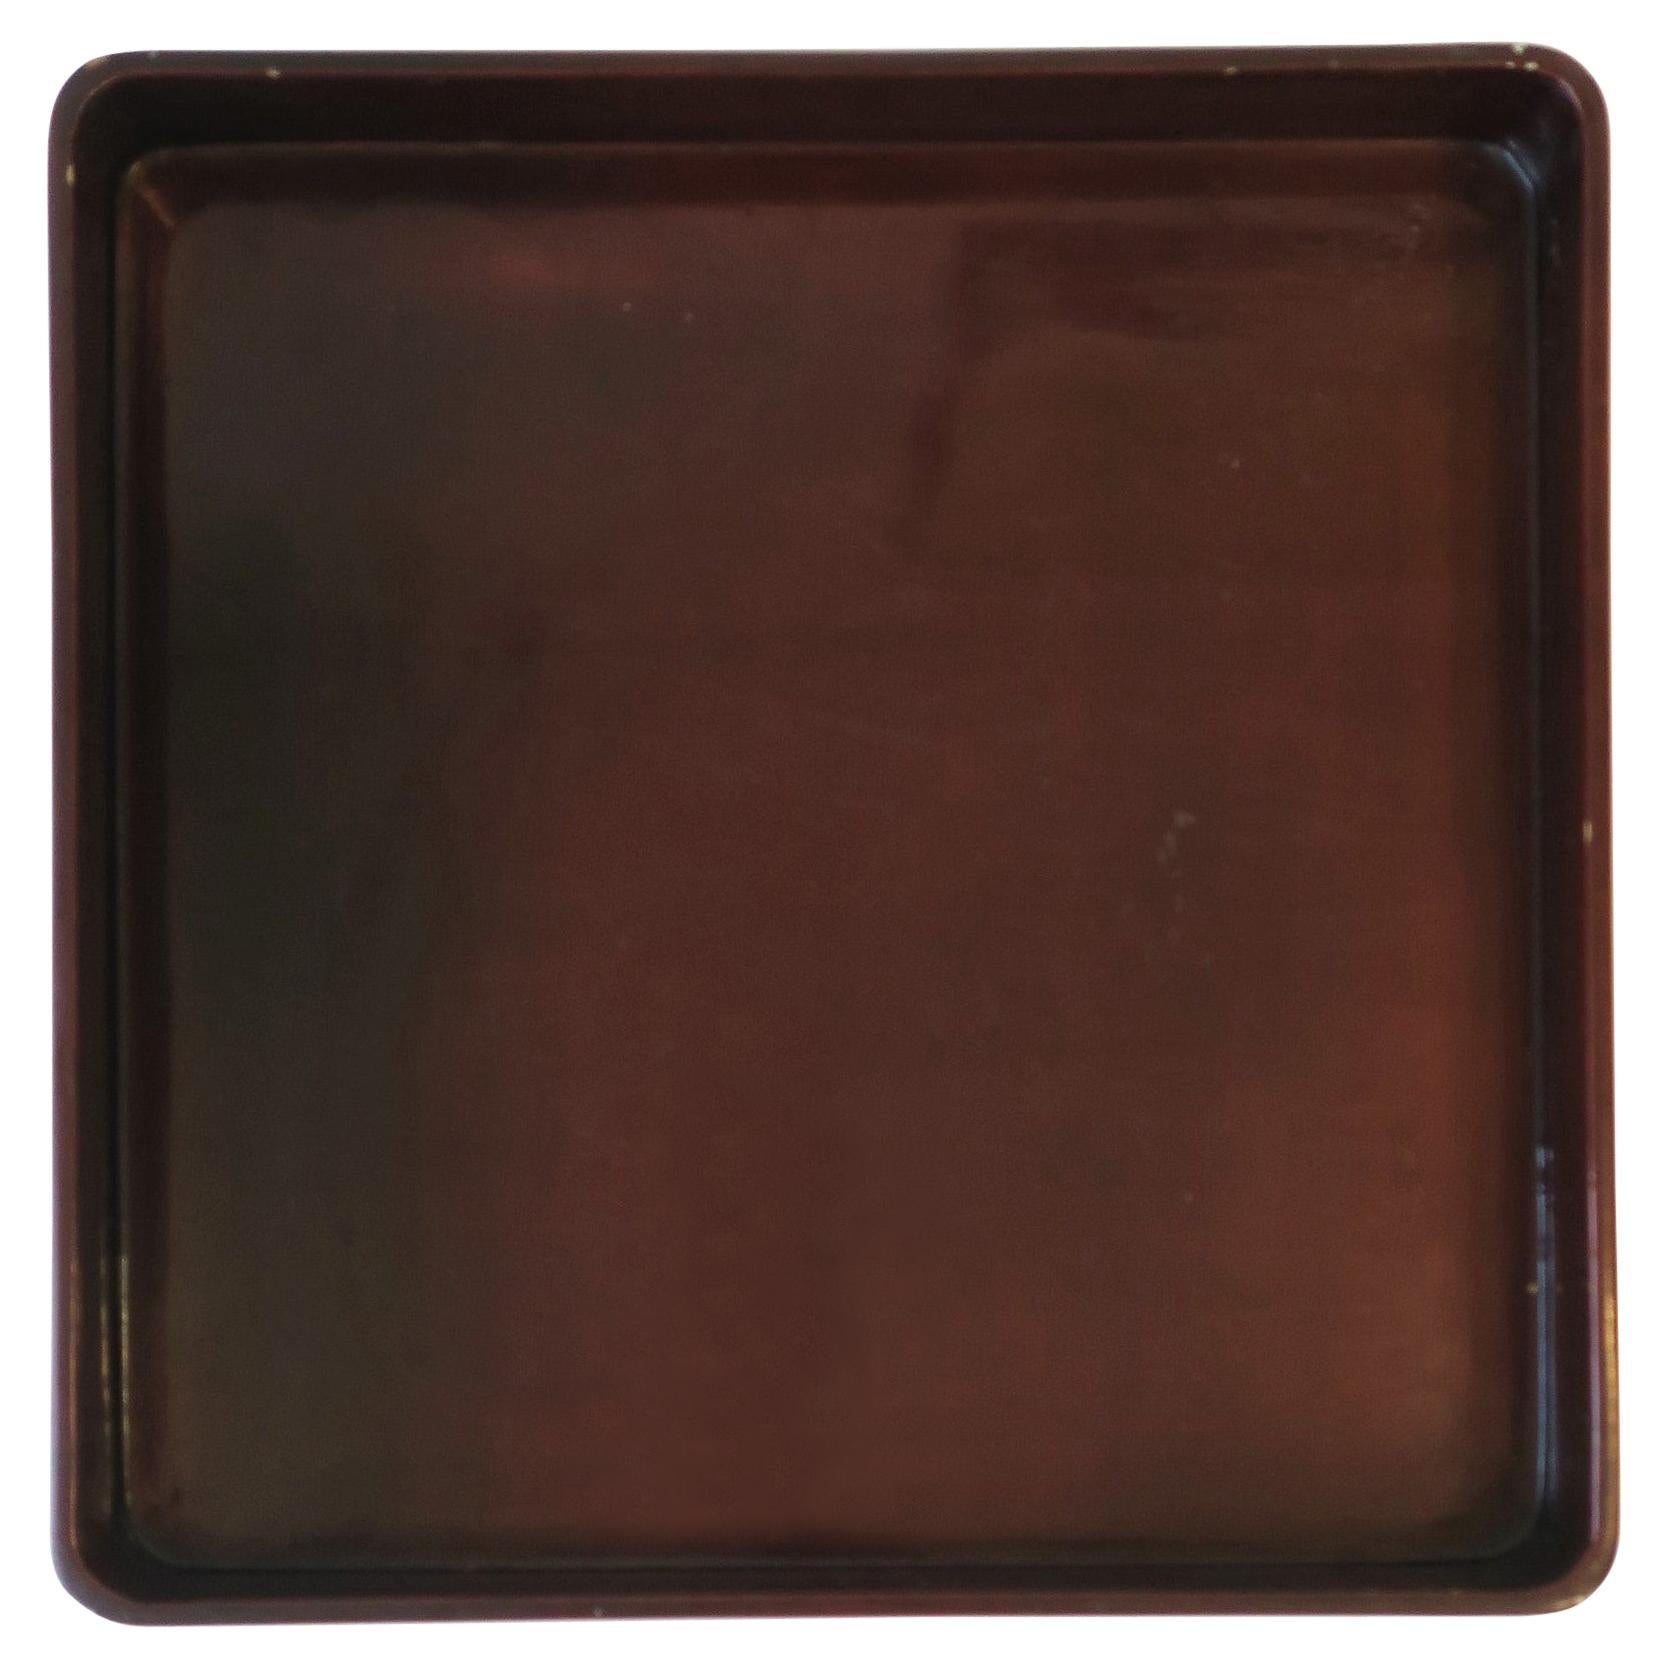 Red Burgundy Lacquer Serving Tray by Designer Rae Kasian, Square